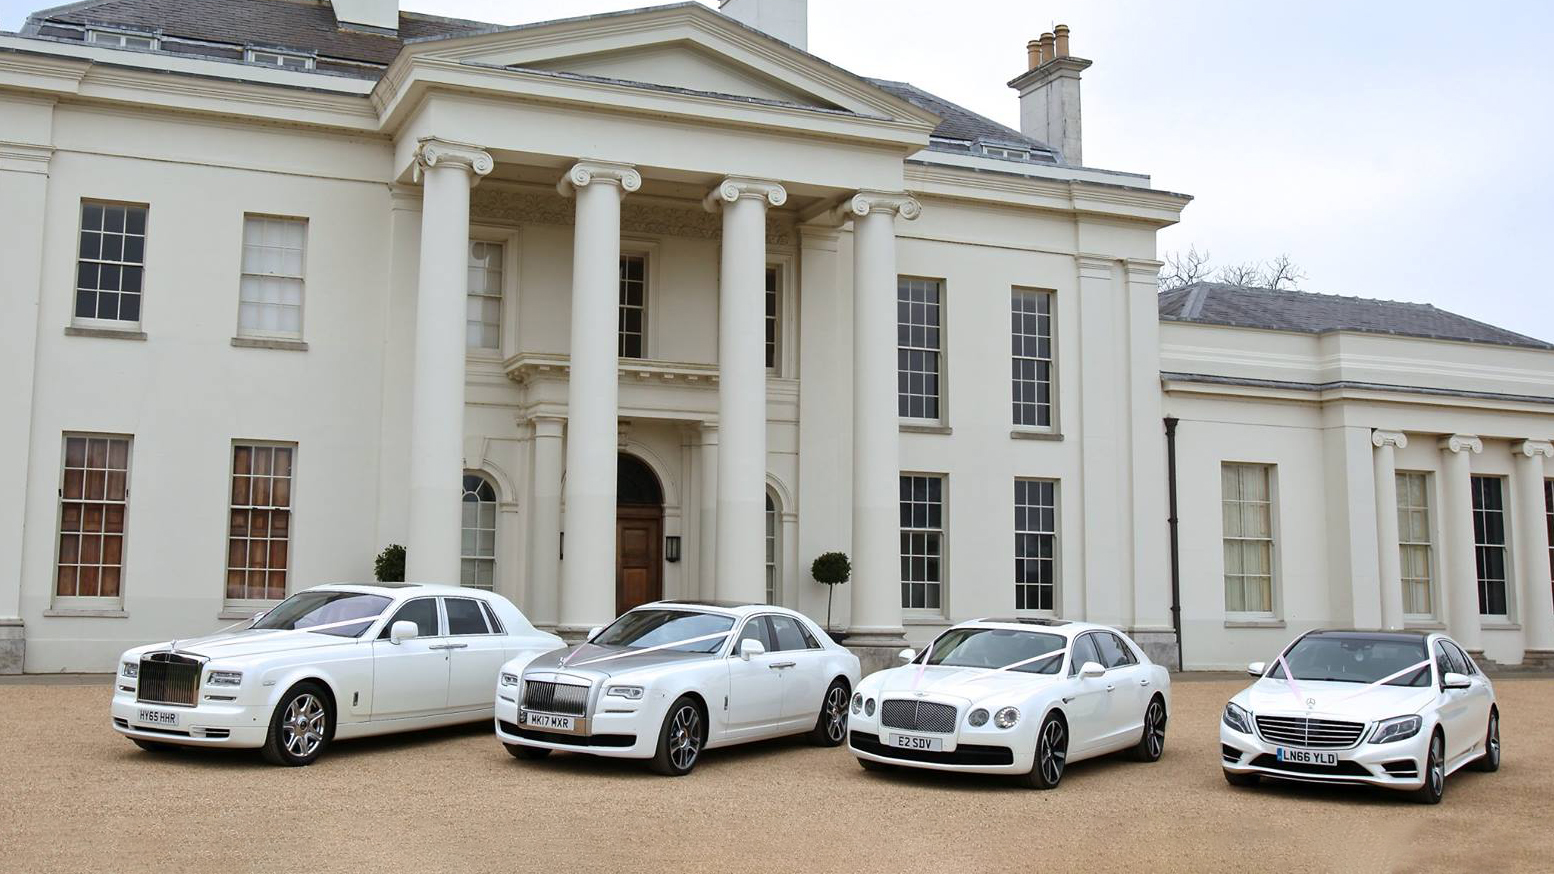 A selection of white Luxurious and modern vehicles all decorated with matching white ribbons on wedding duties in Cranfield. Frot Left to right: Rolls-Royce Phantom, Rolls-Royce Gh